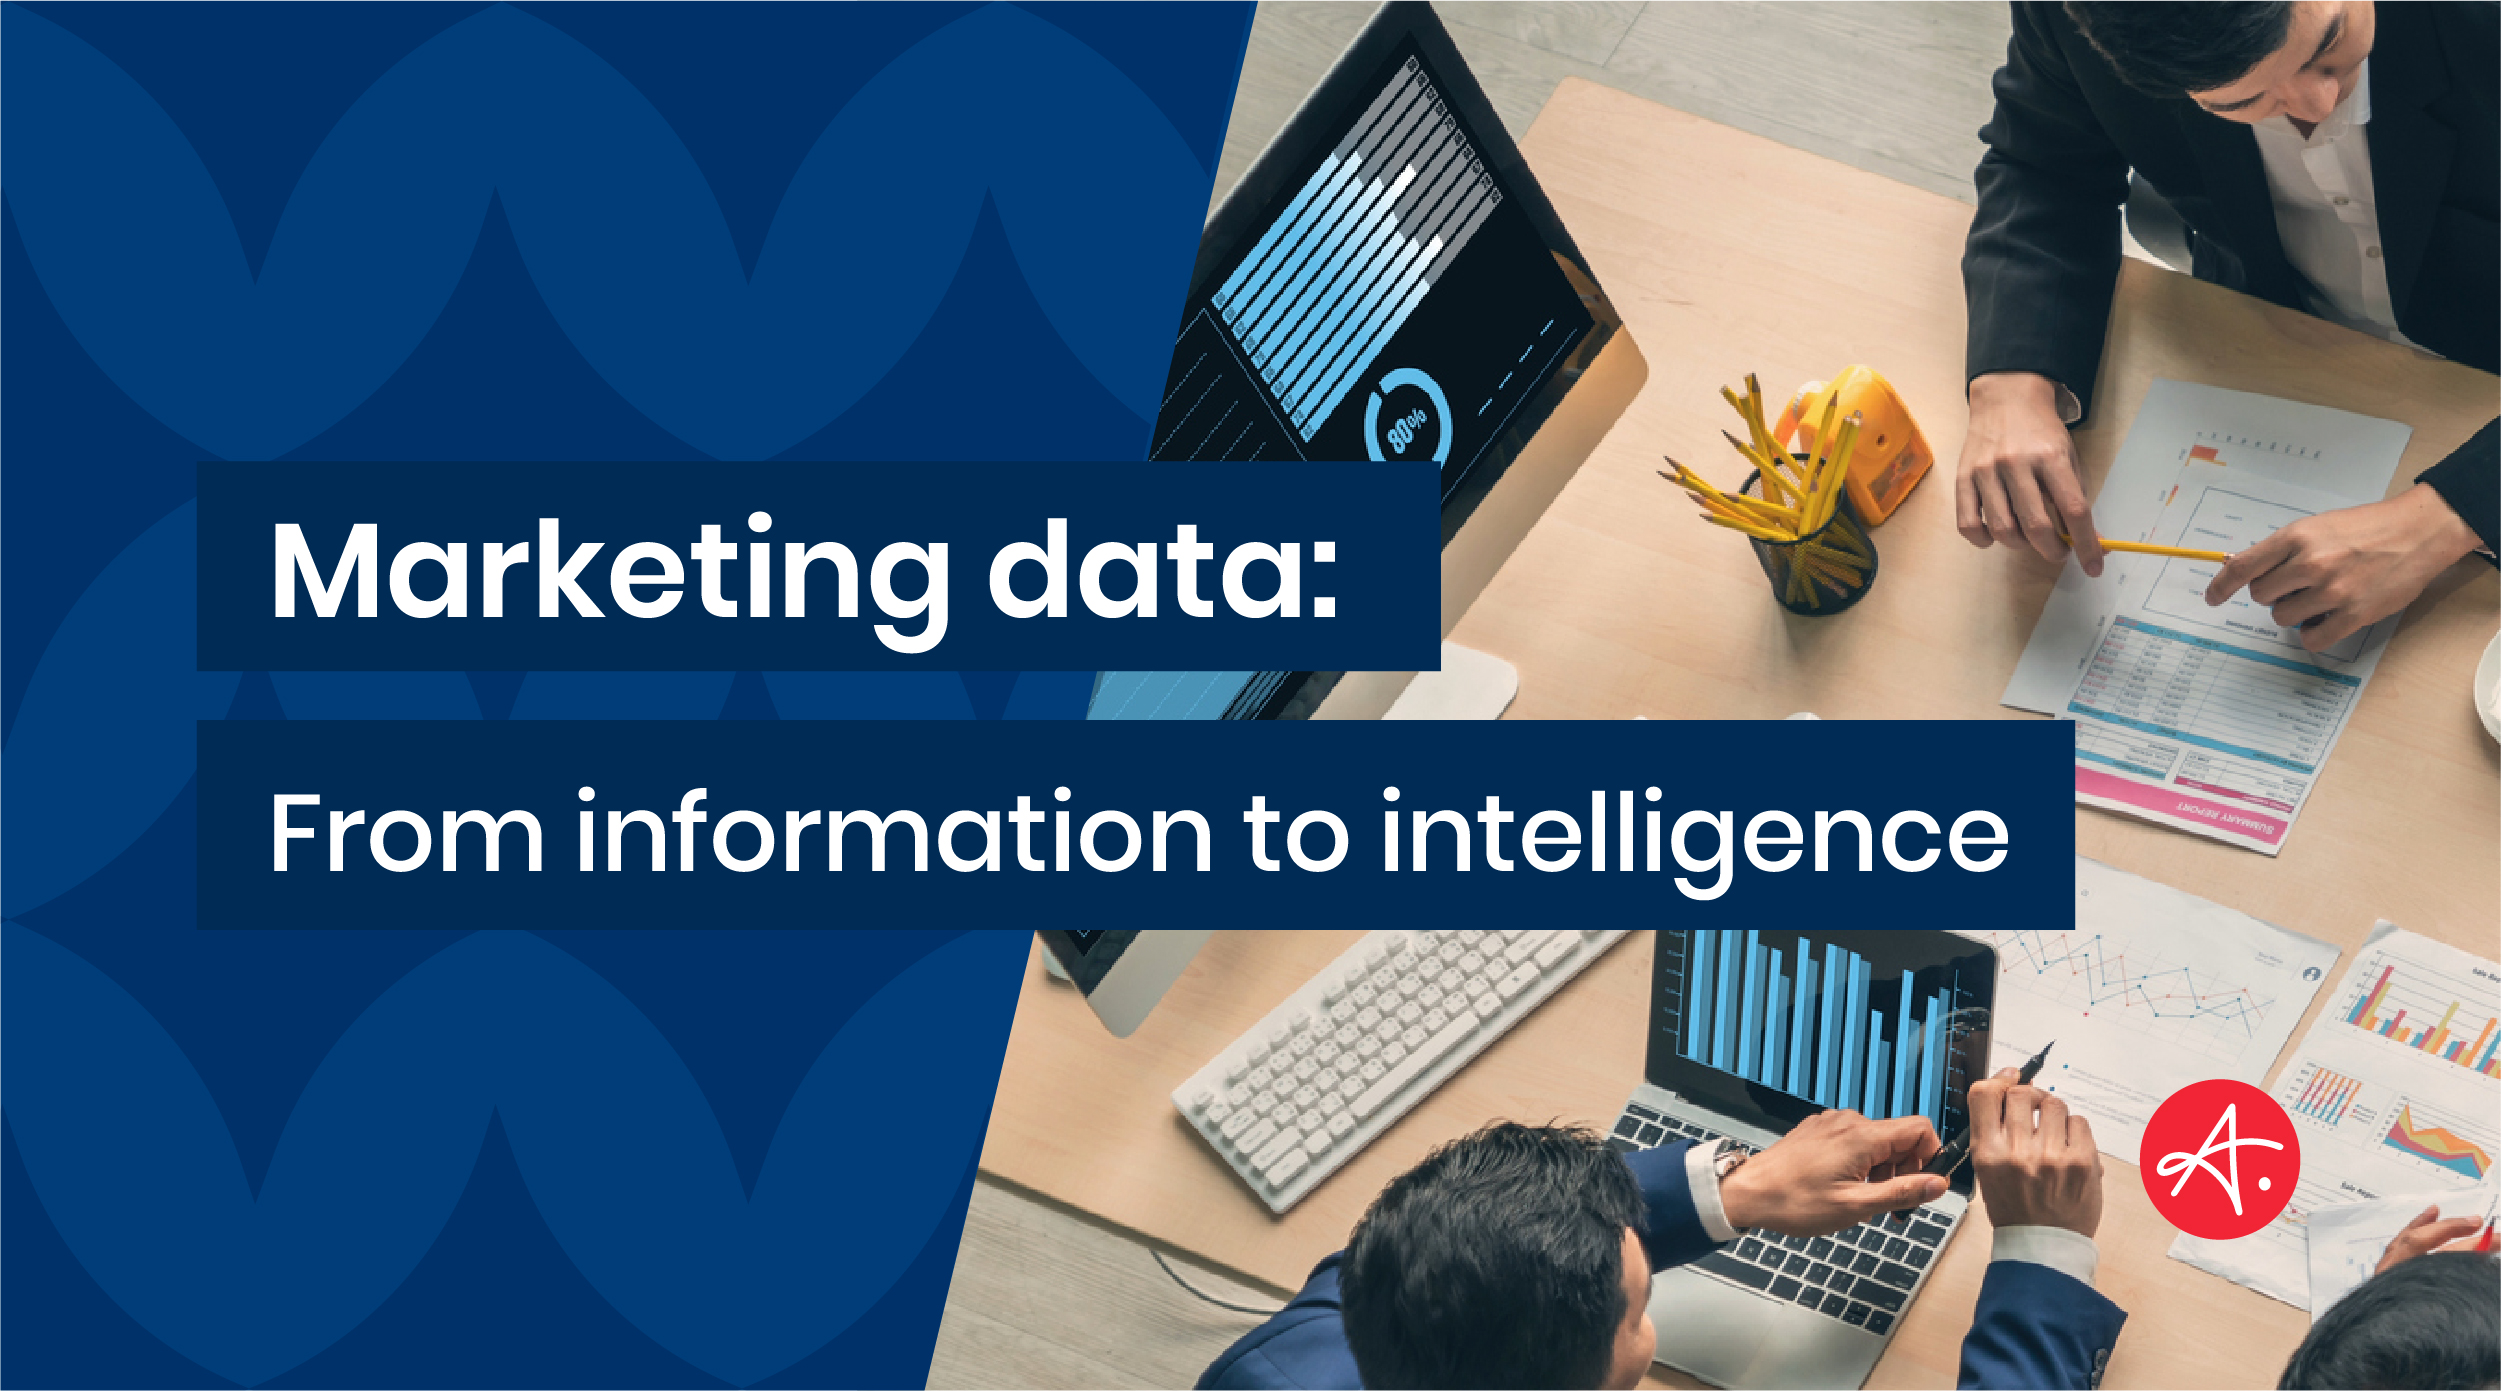 Marketing data: From information to intelligence